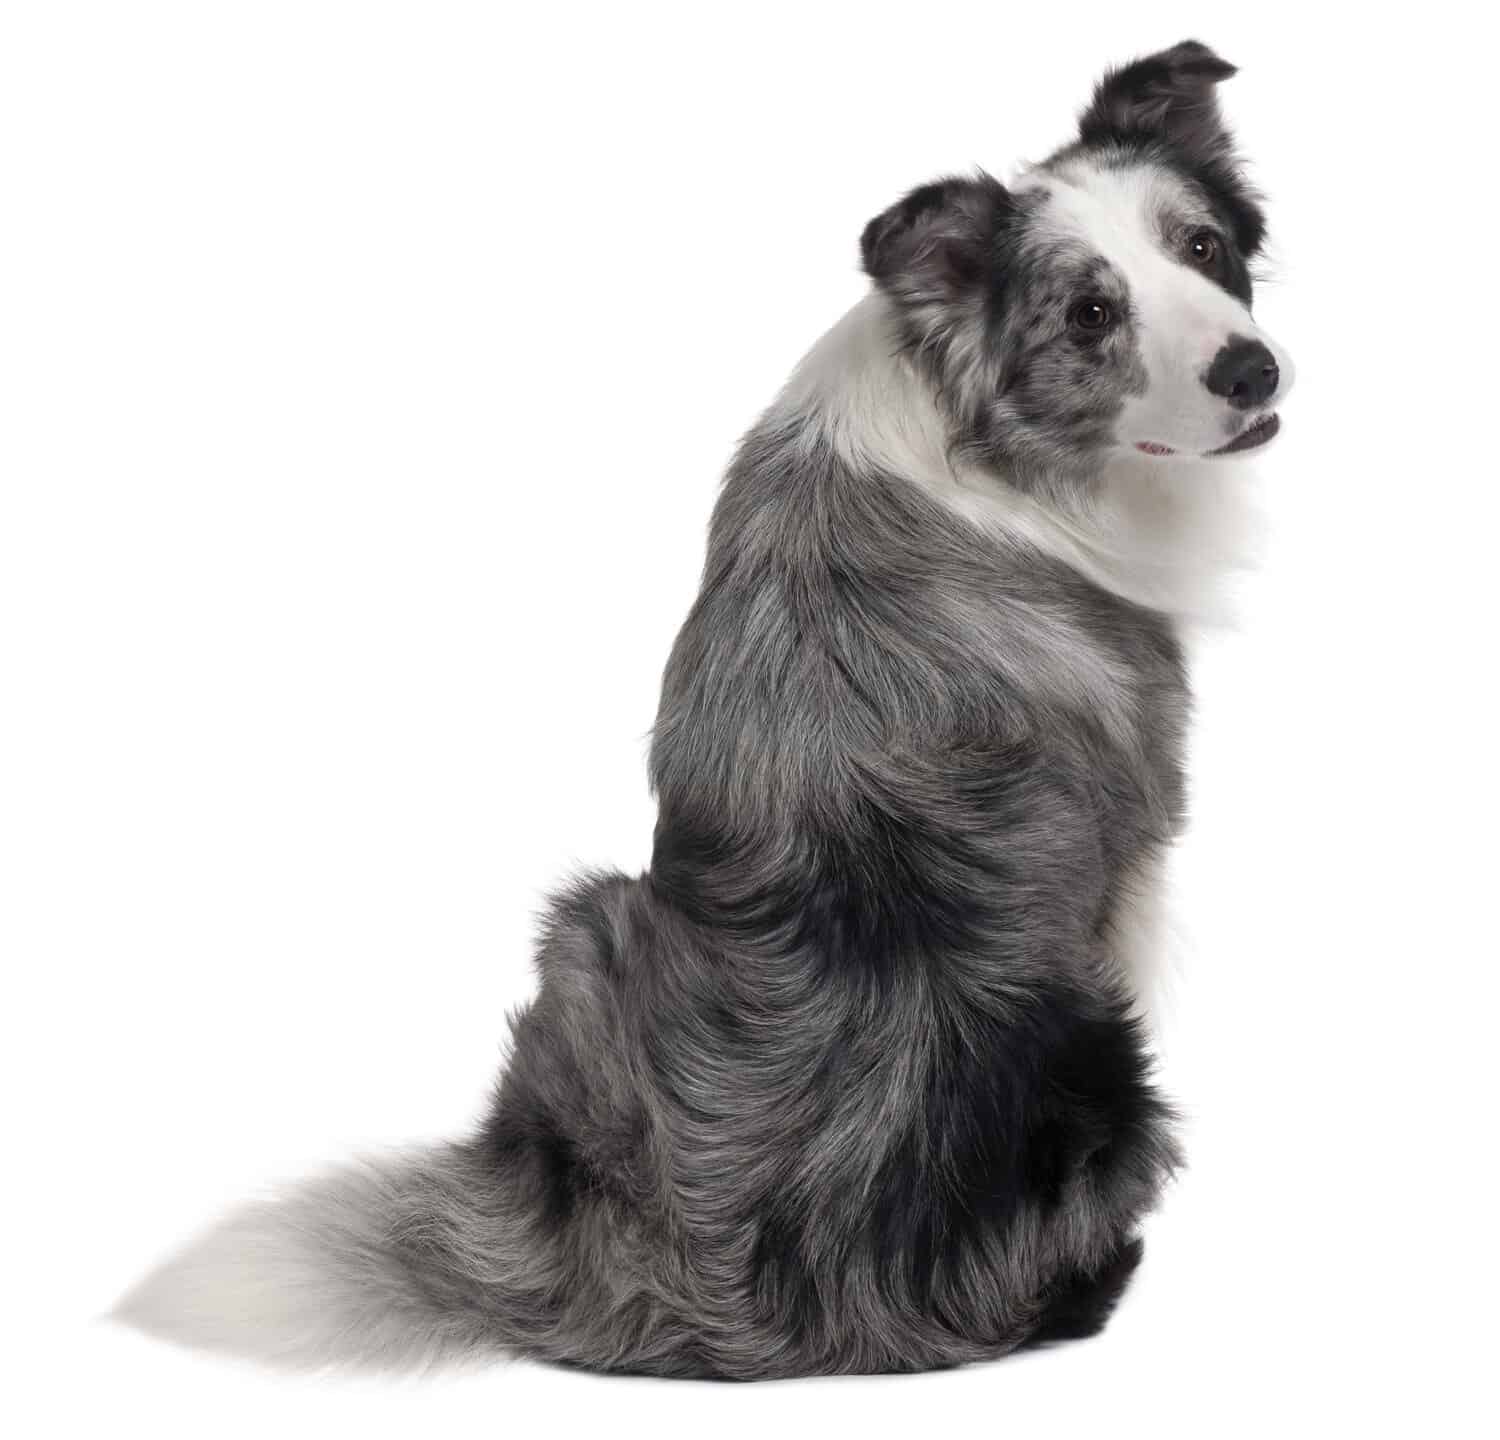 Border Collie, 1 years old, sitting in front of white background